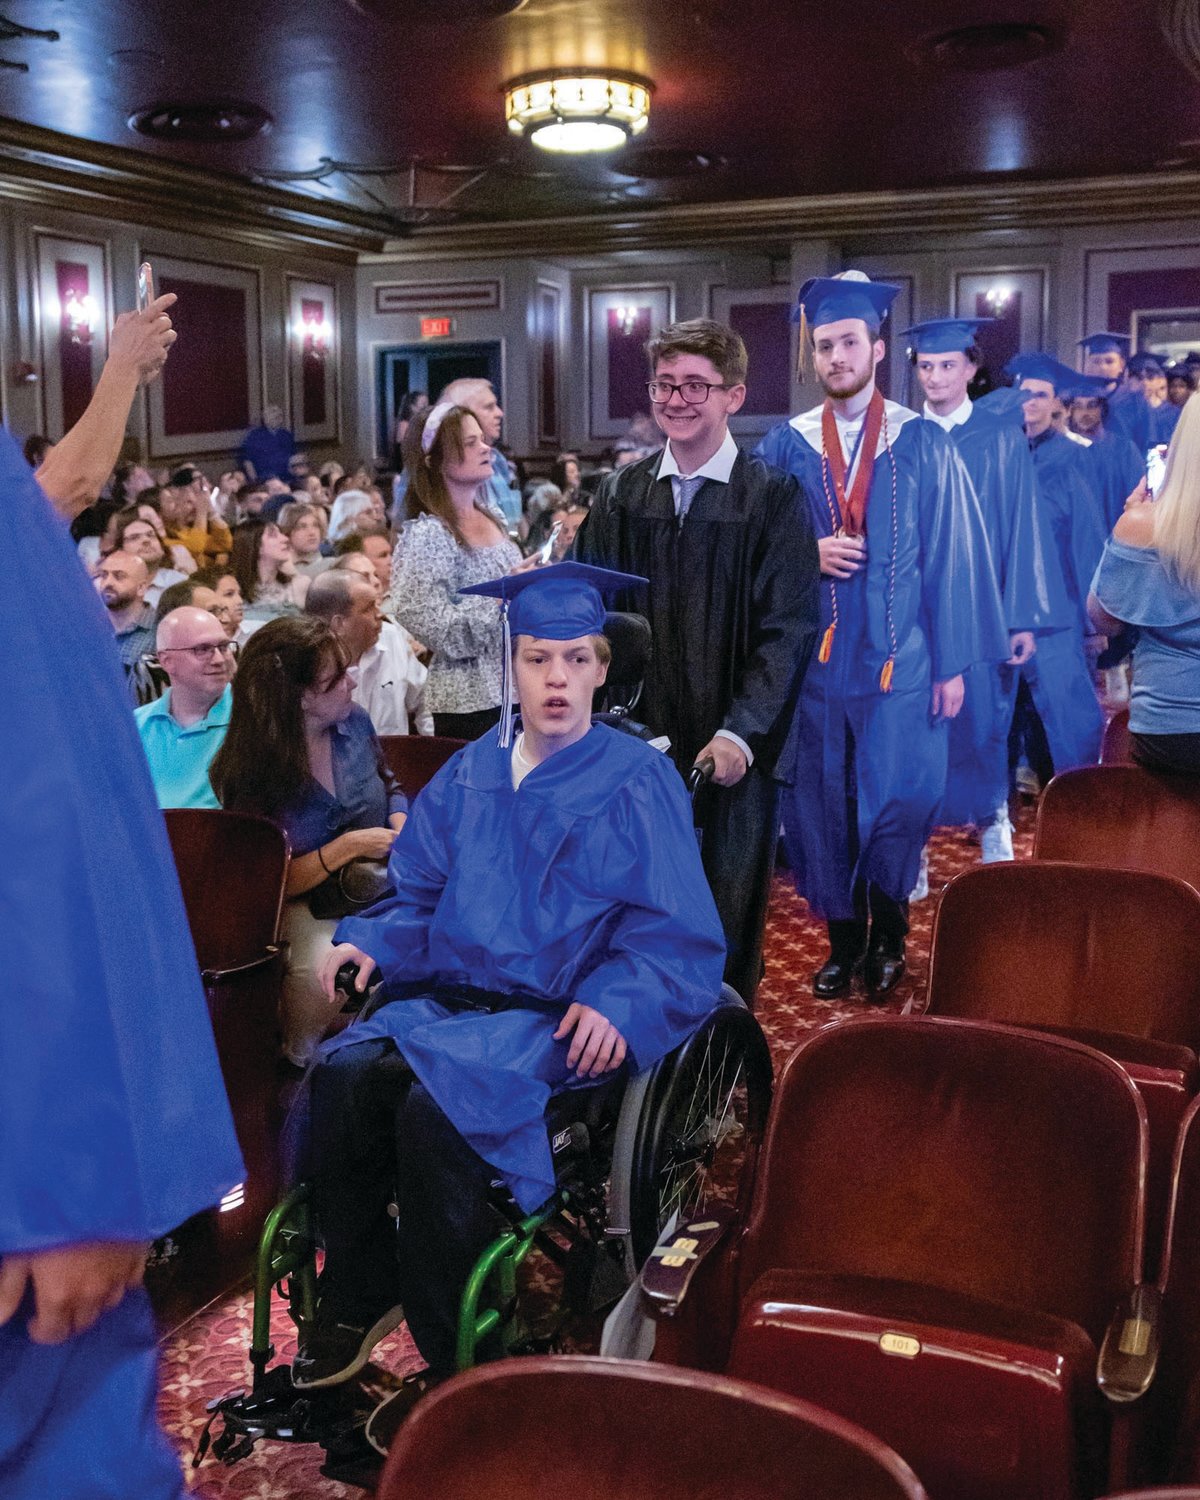 SENIORS NO MORE: Around 147 Johnston graduates flipped their tassels last Friday night. The Johnston Senior High School Class of 2022 celebrated commencement during a ceremony at the Veterans Memorial Auditorium in Providence. (Photos by Leo van Dijk/rhodyphoto.zenfolio.com)